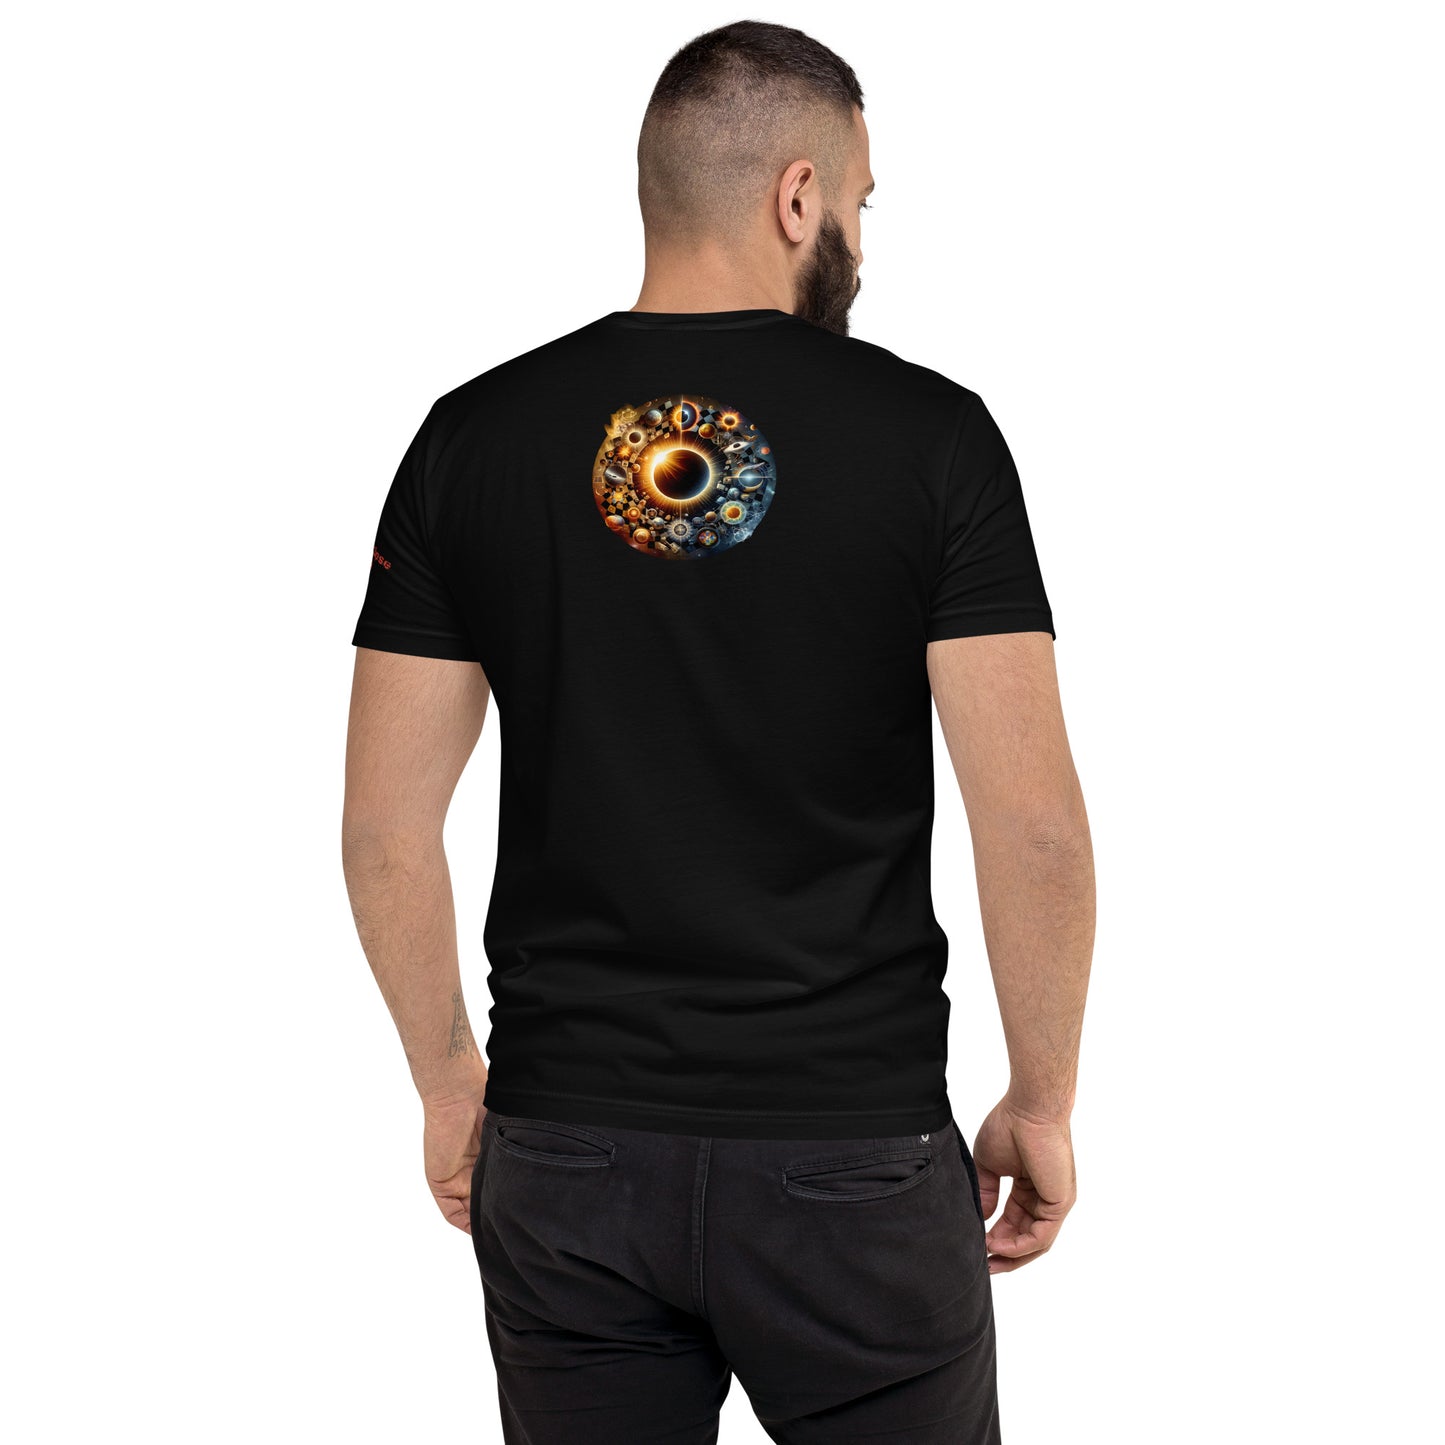 Texas Eclipse 2024 - Short Sleeve Men's Fitted T-shirt Festival